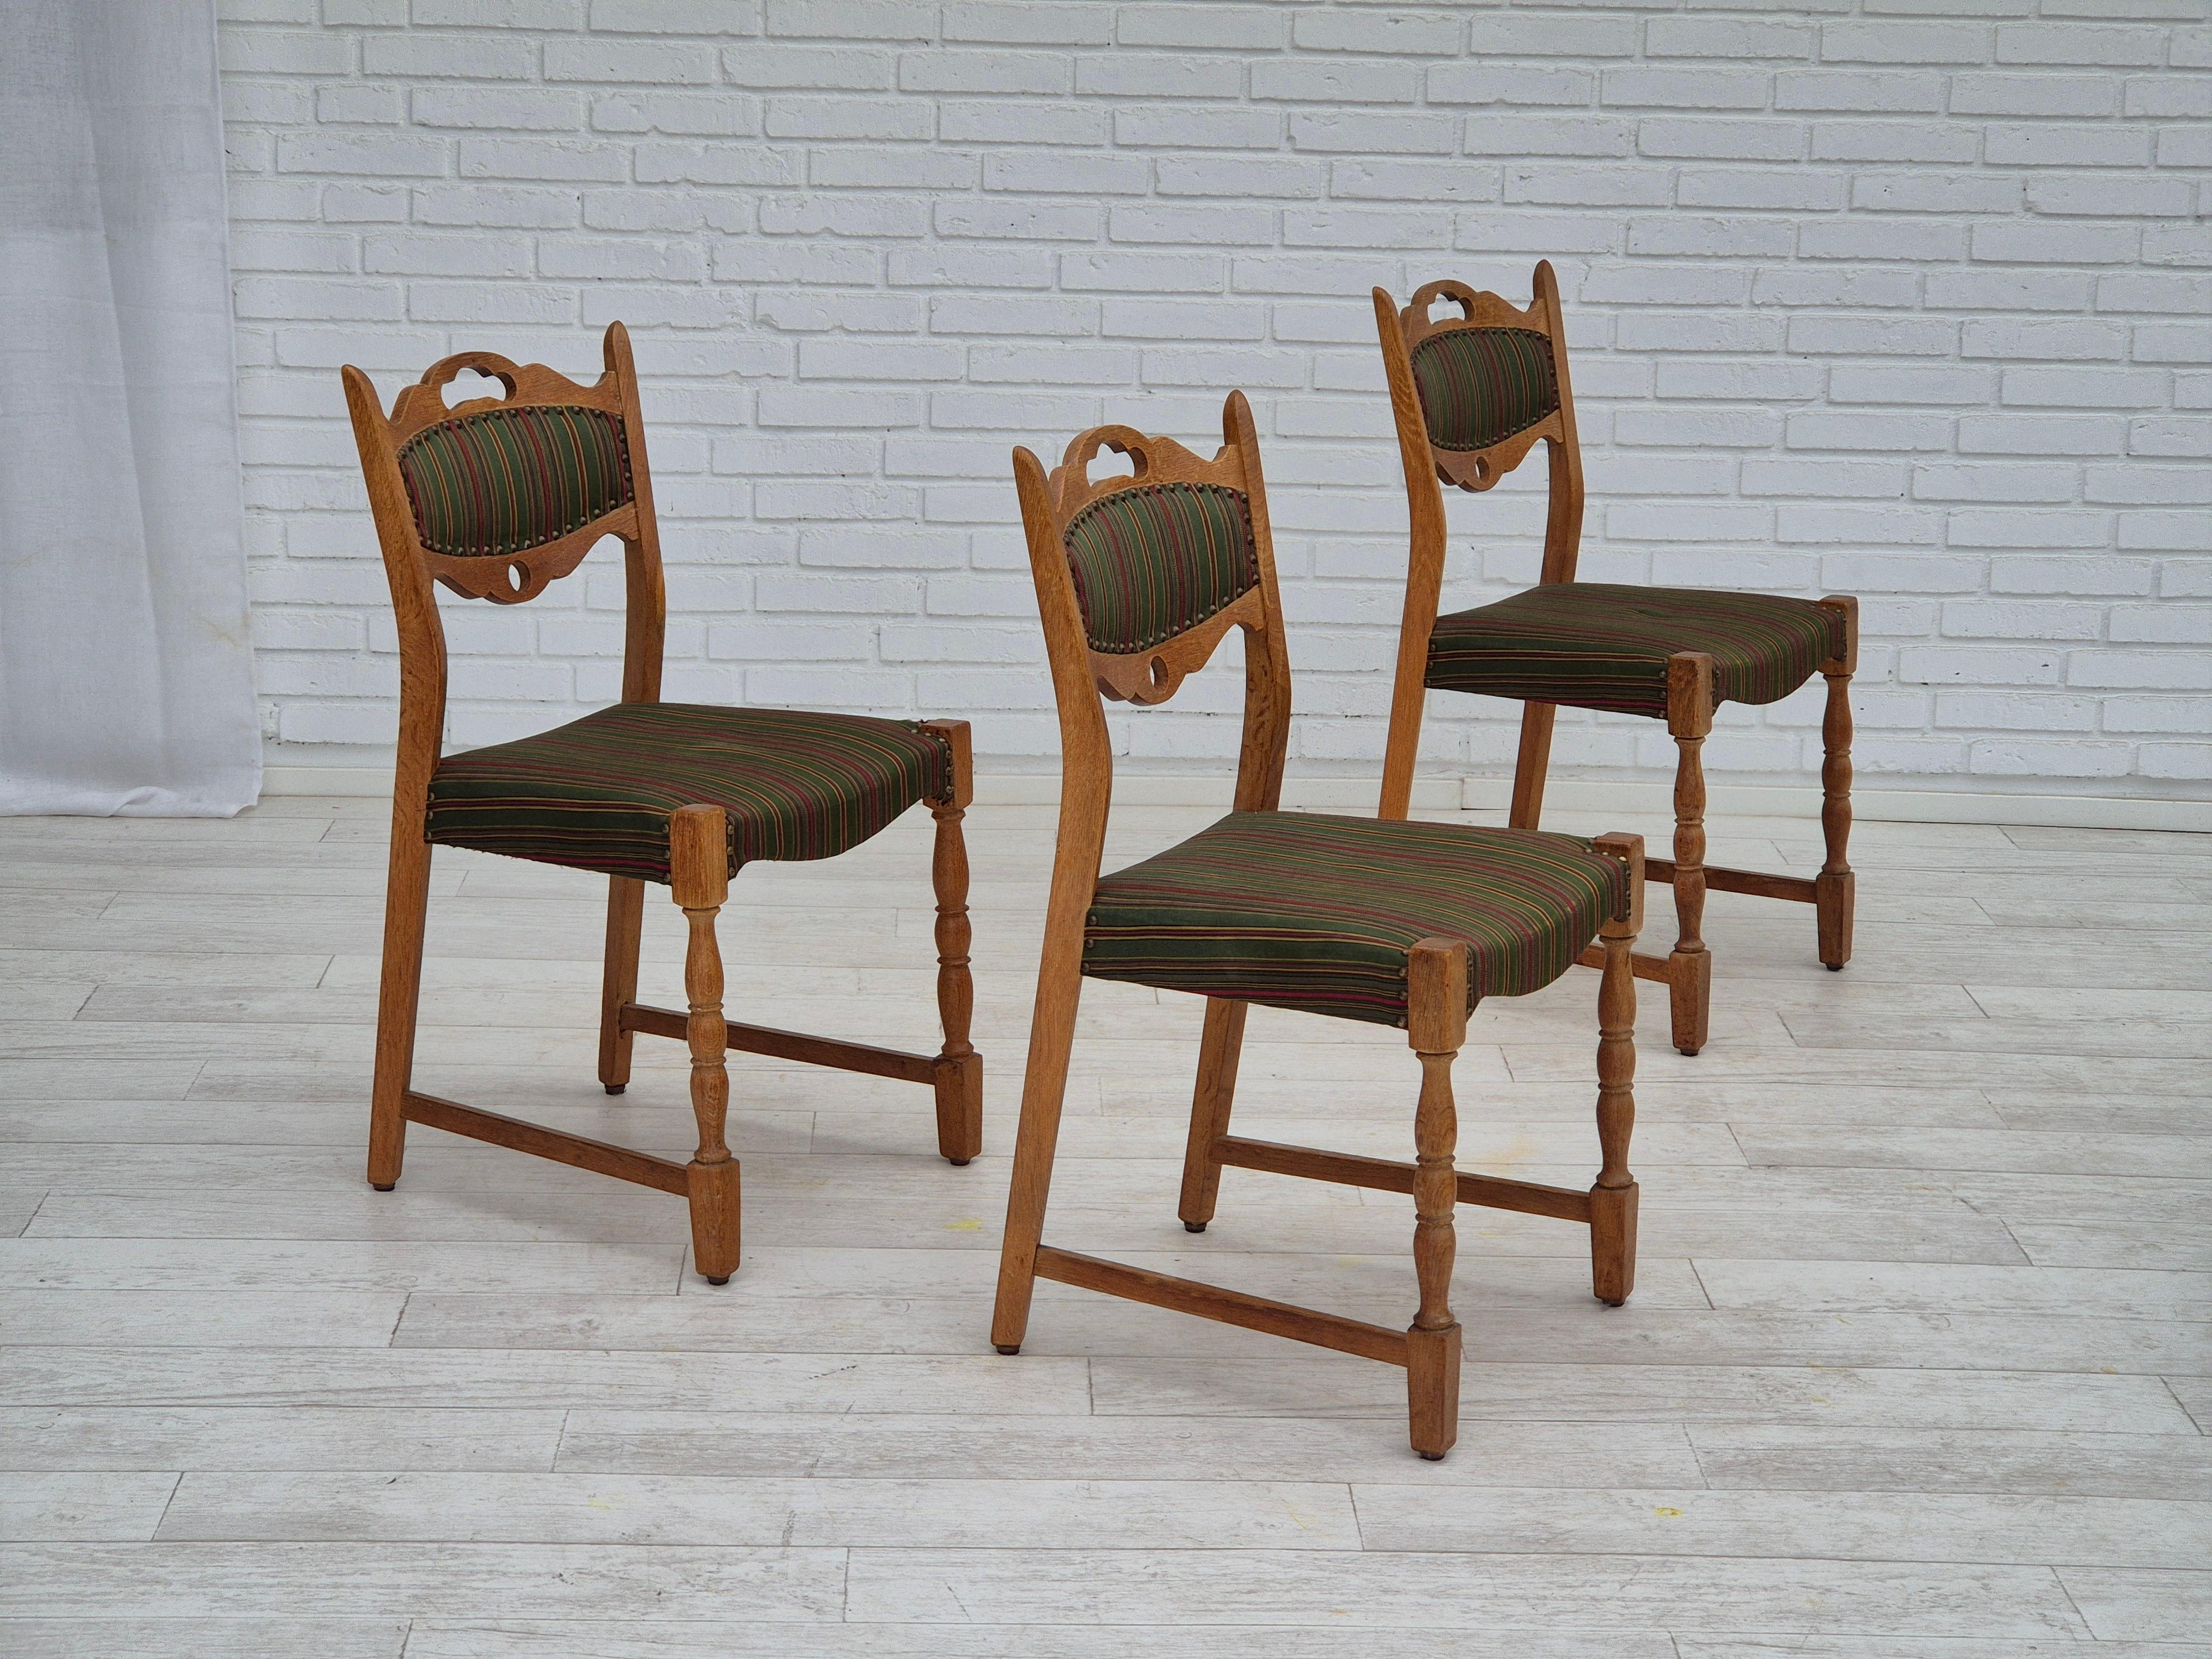 1960s, set of 3 dining chairs in original good condition: no smells and no stains. Green/multi color furniture wool, oak wood. Manufactured by Danish furniture manufacturer in about 1960s.